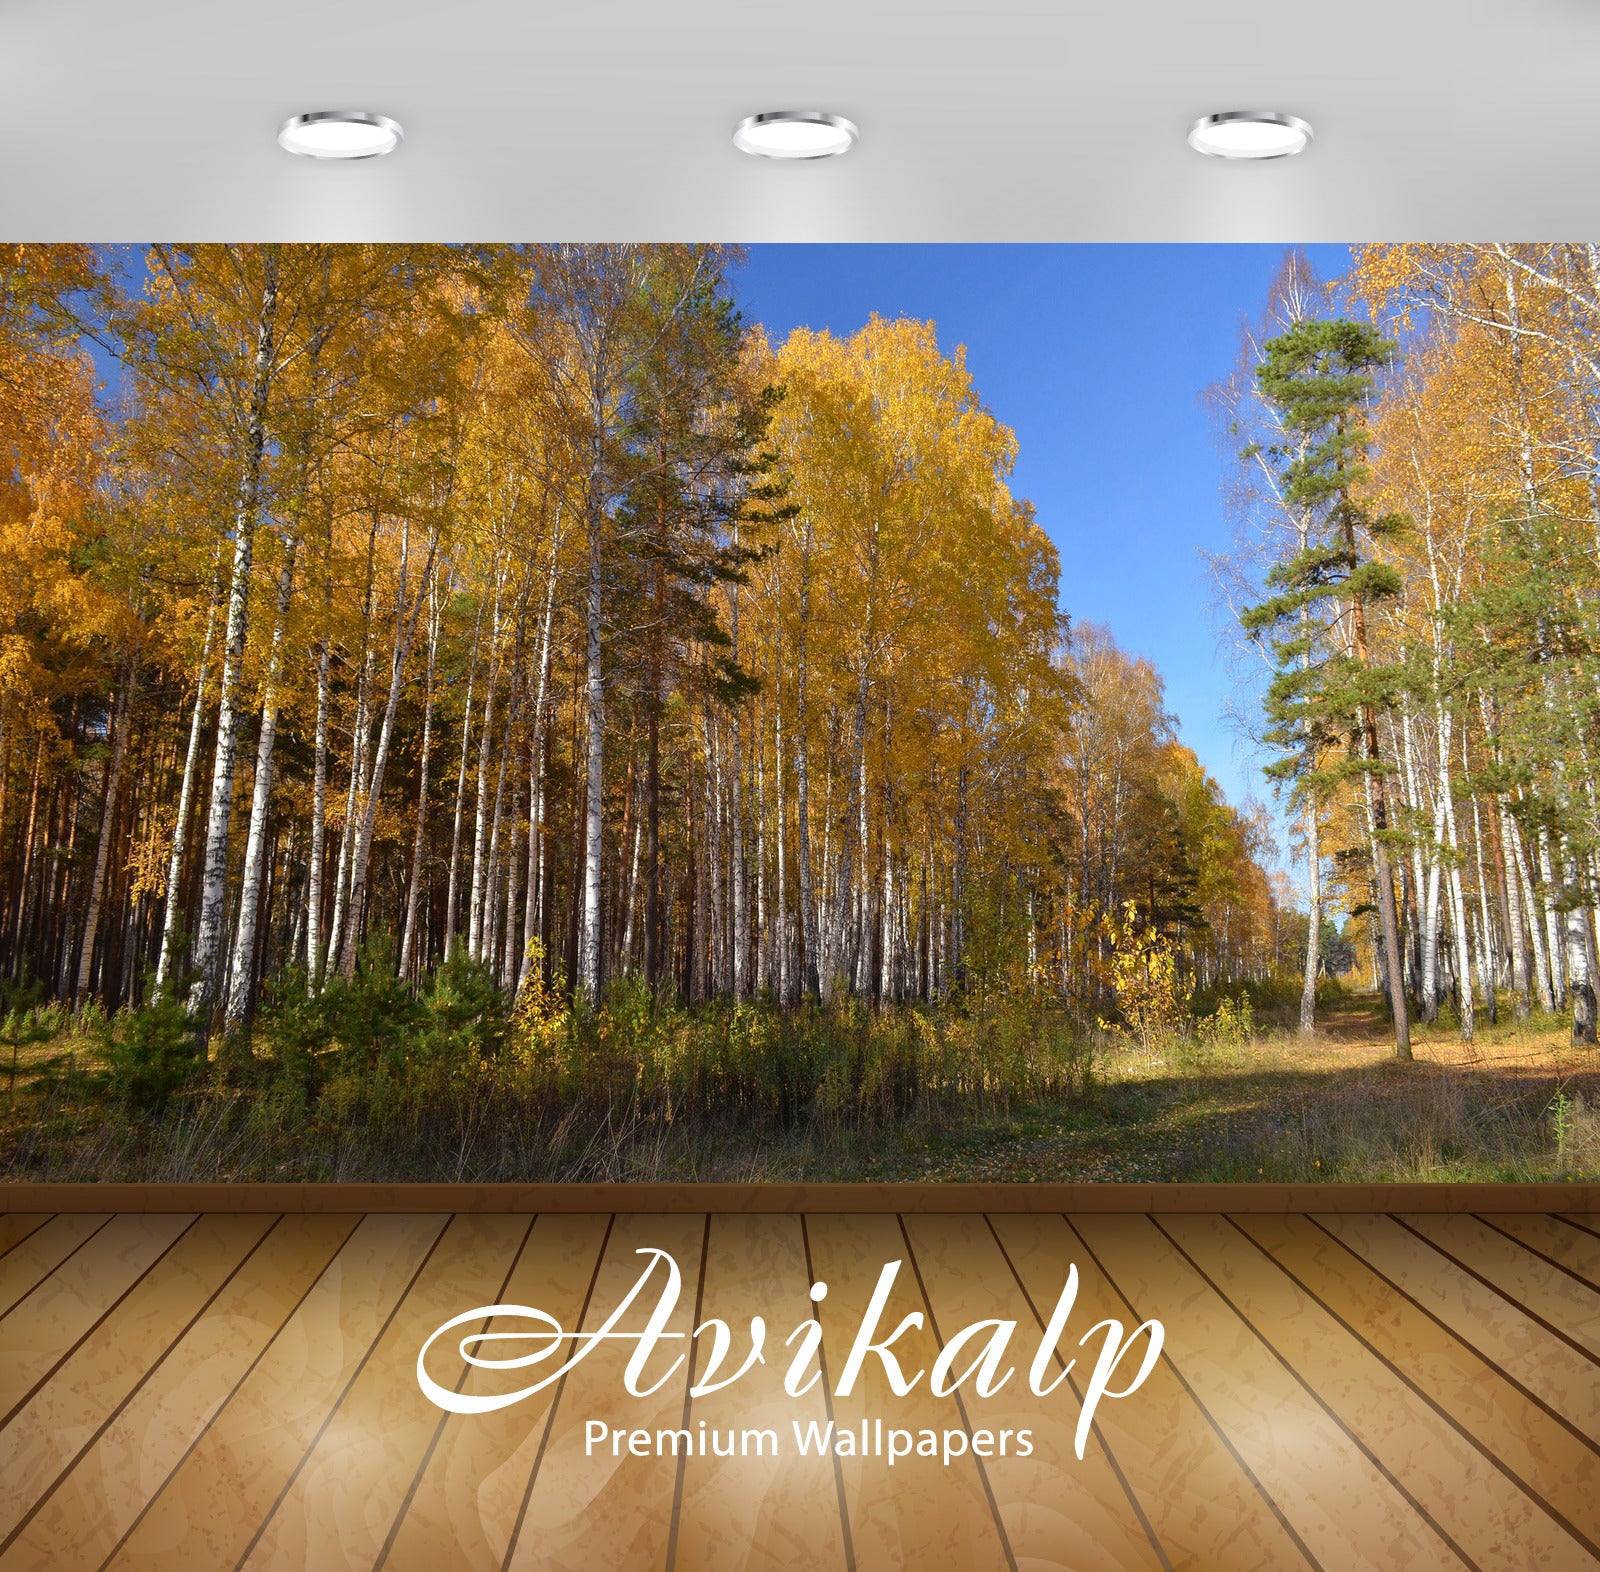 Avikalp Exclusive Awi5234 Birch Autumn Forest Nature Full HD Wallpapers for Living room, Hall, Kids